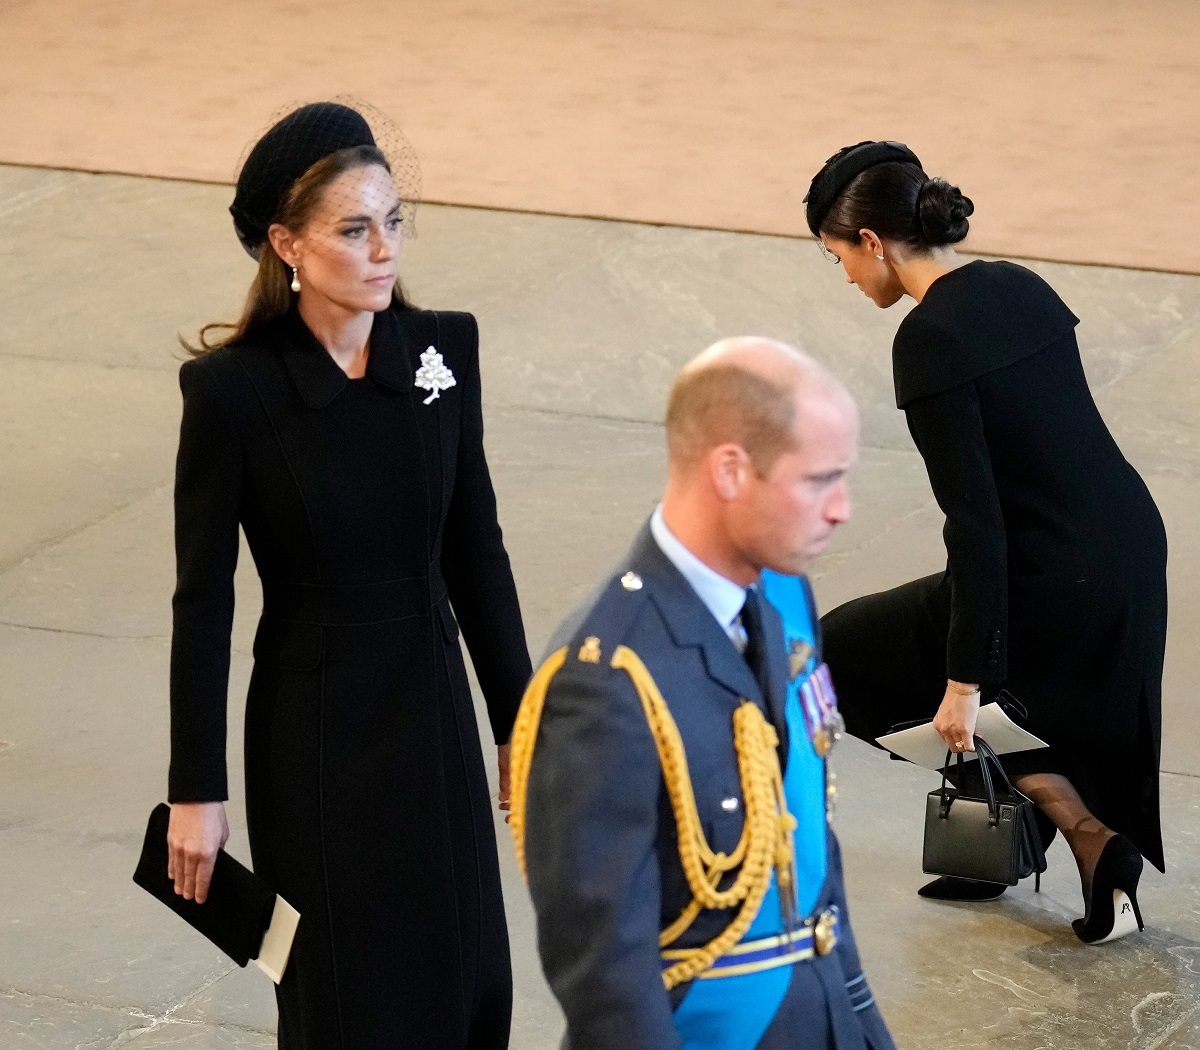 Prince William, Kate Middleton, and Meghan Markle pay their respects in The Palace of Westminster after the procession for the Lying-in State of Queen Elizabeth II